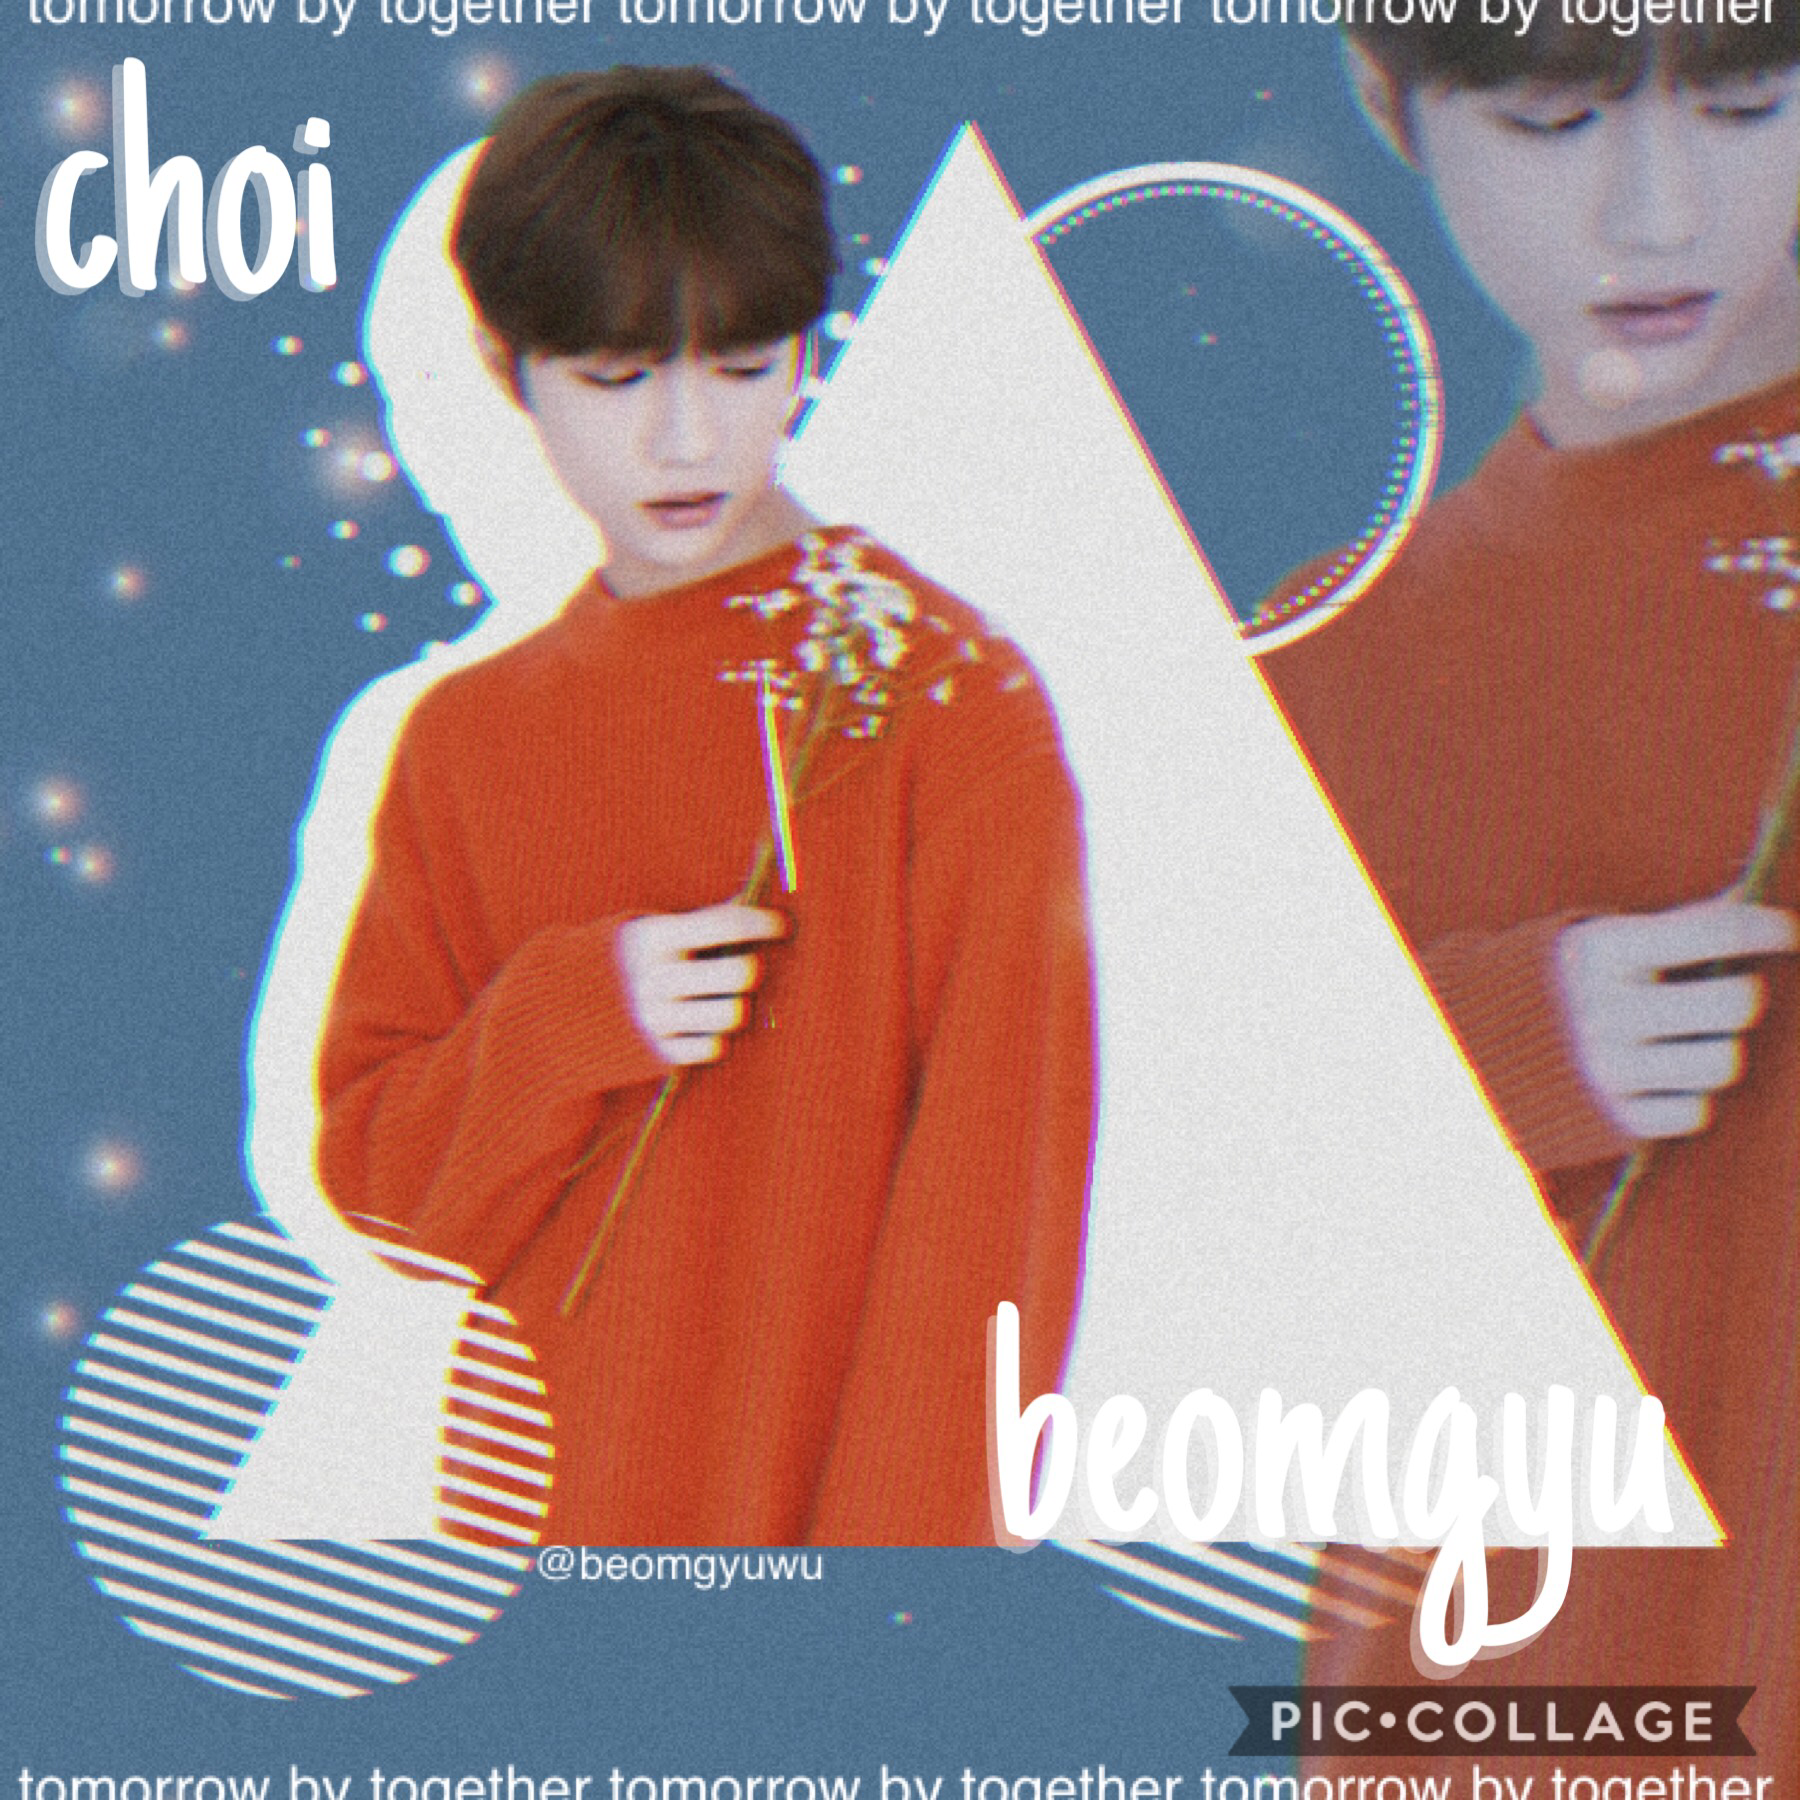 💫ｂｅｏｍｇｙｕ (tap)
oML iS tHaT aN eDiT¿¿
yep :) I finally have some inspo~~
inspired by @jUsT-peachy (go follow her rn!)
QOTD: describe your life in 4 emojis (this is not a question but anyway)
a: 😔😳🙊😴🍜 idk lol